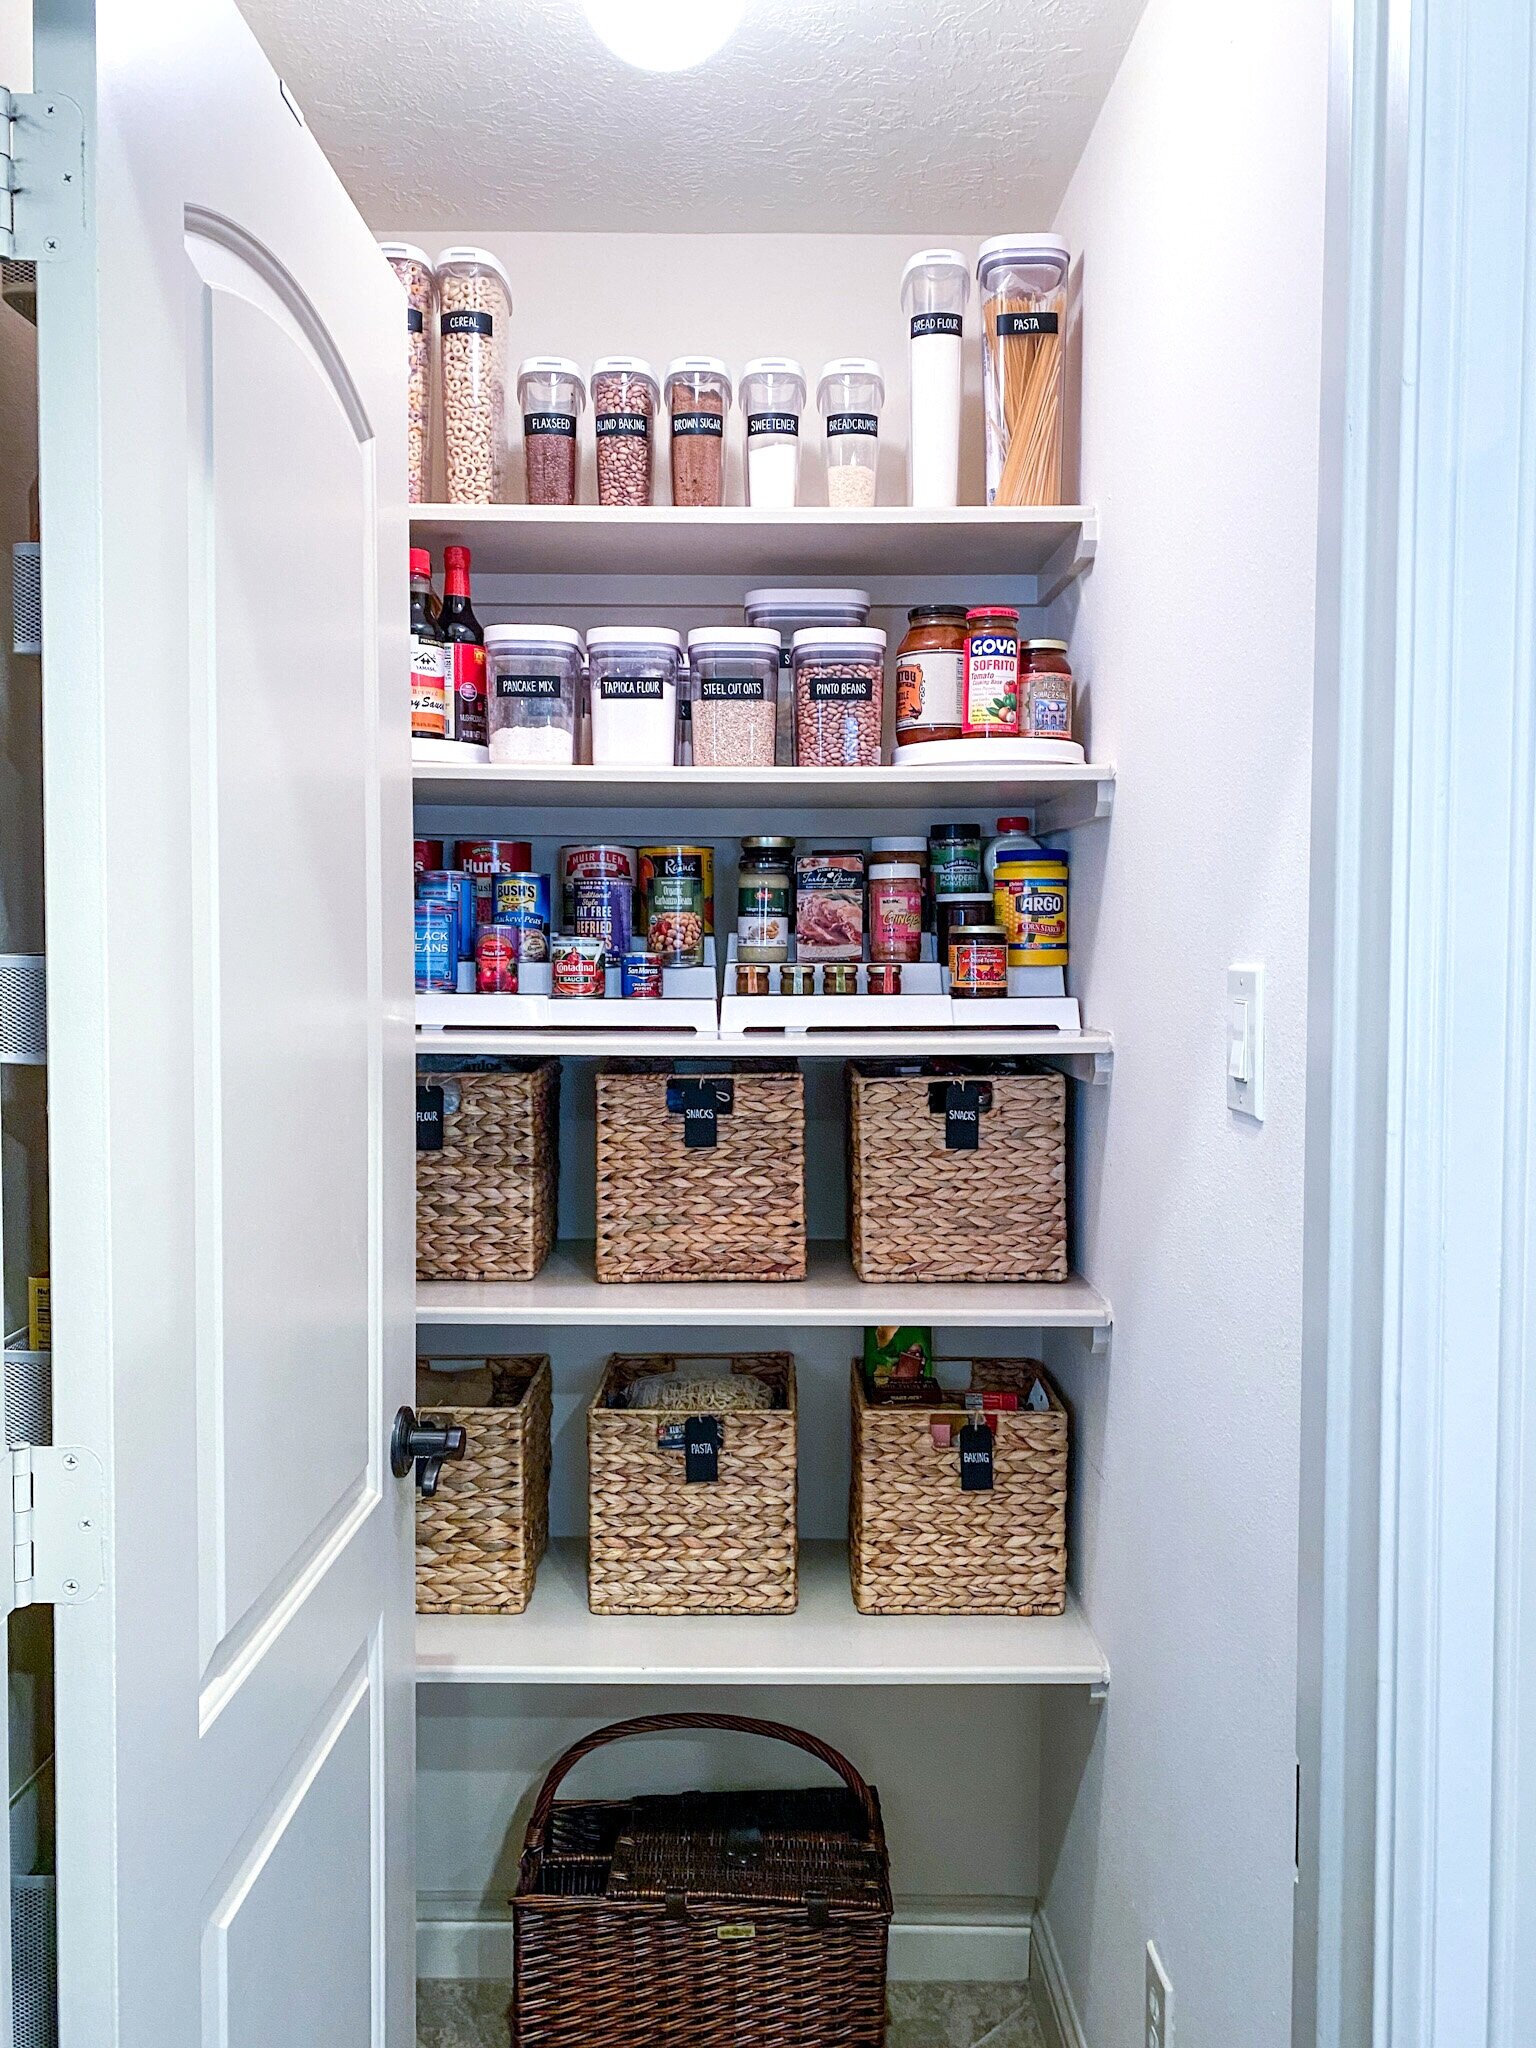 How to Organize Your Home Pantry - The New York Times